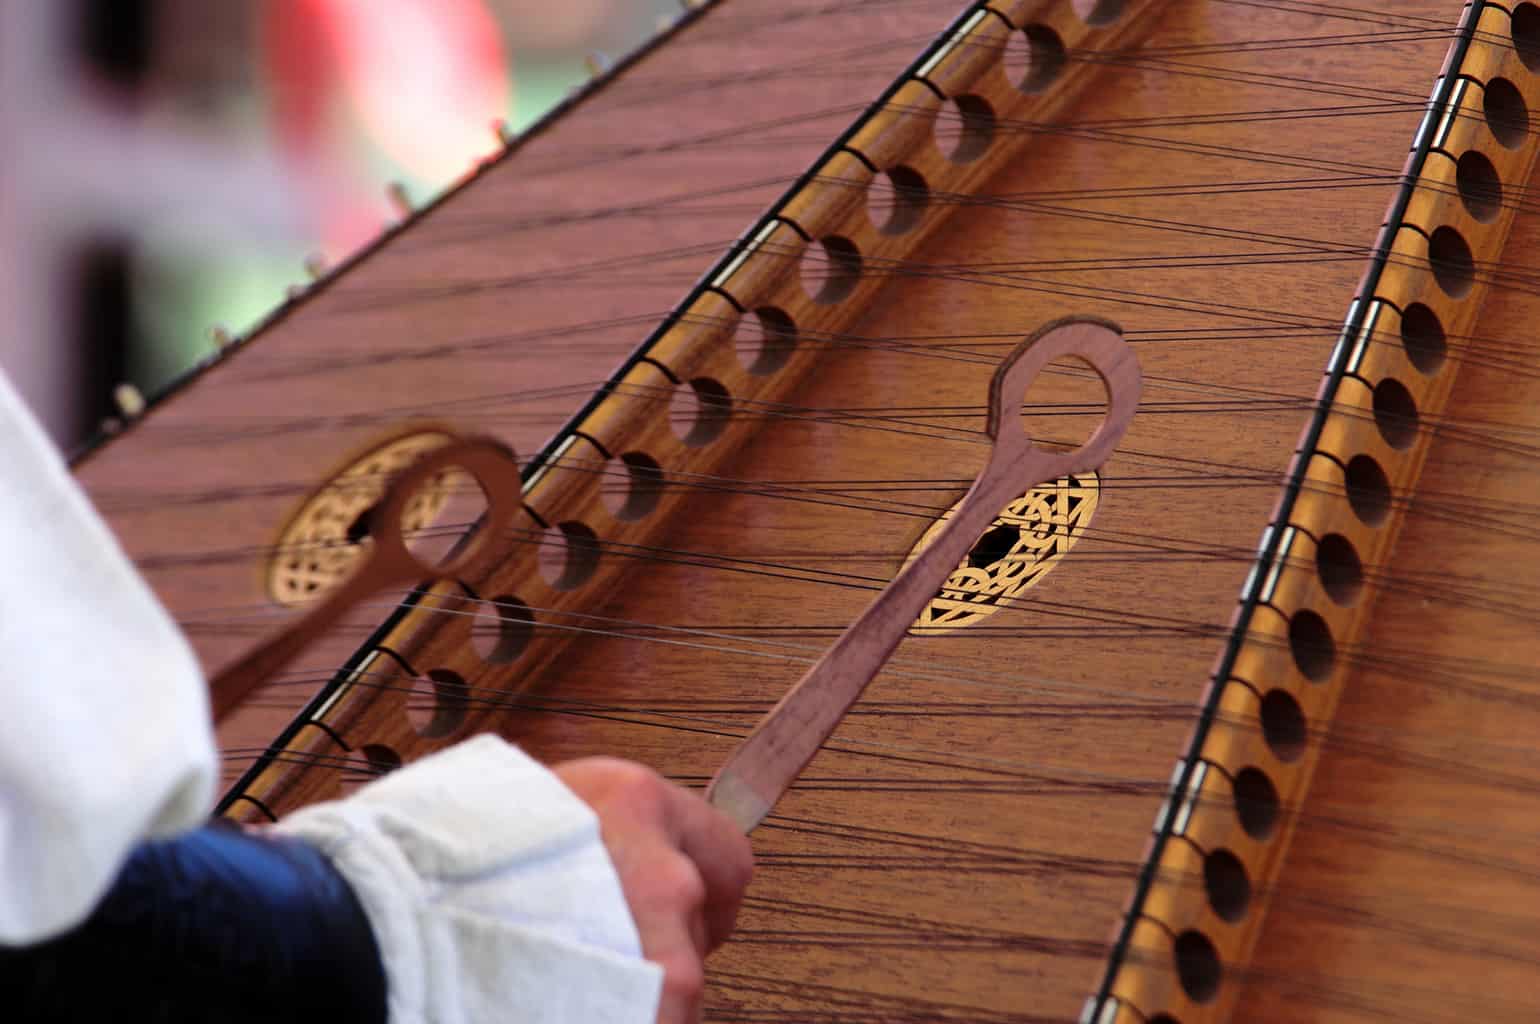 How to Play the Hammered Dulcimer: 5 Simple Steps